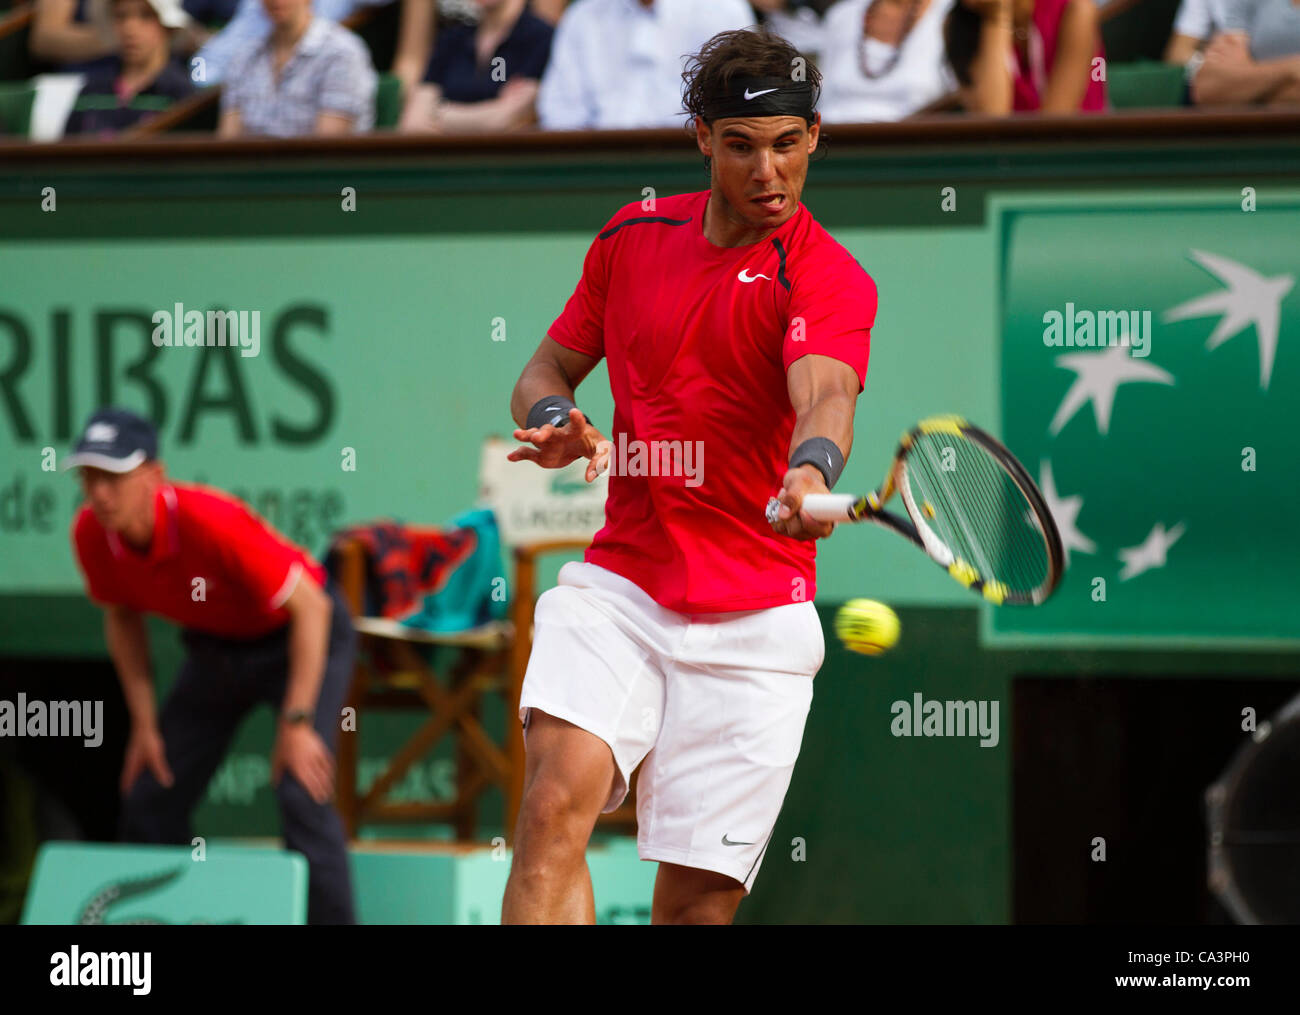 02.06.2012 Paris, France. Rafael Nadal in action against Eduardo Schwank on day 7 of the French Open Tennis from Roland Garros. Stock Photo